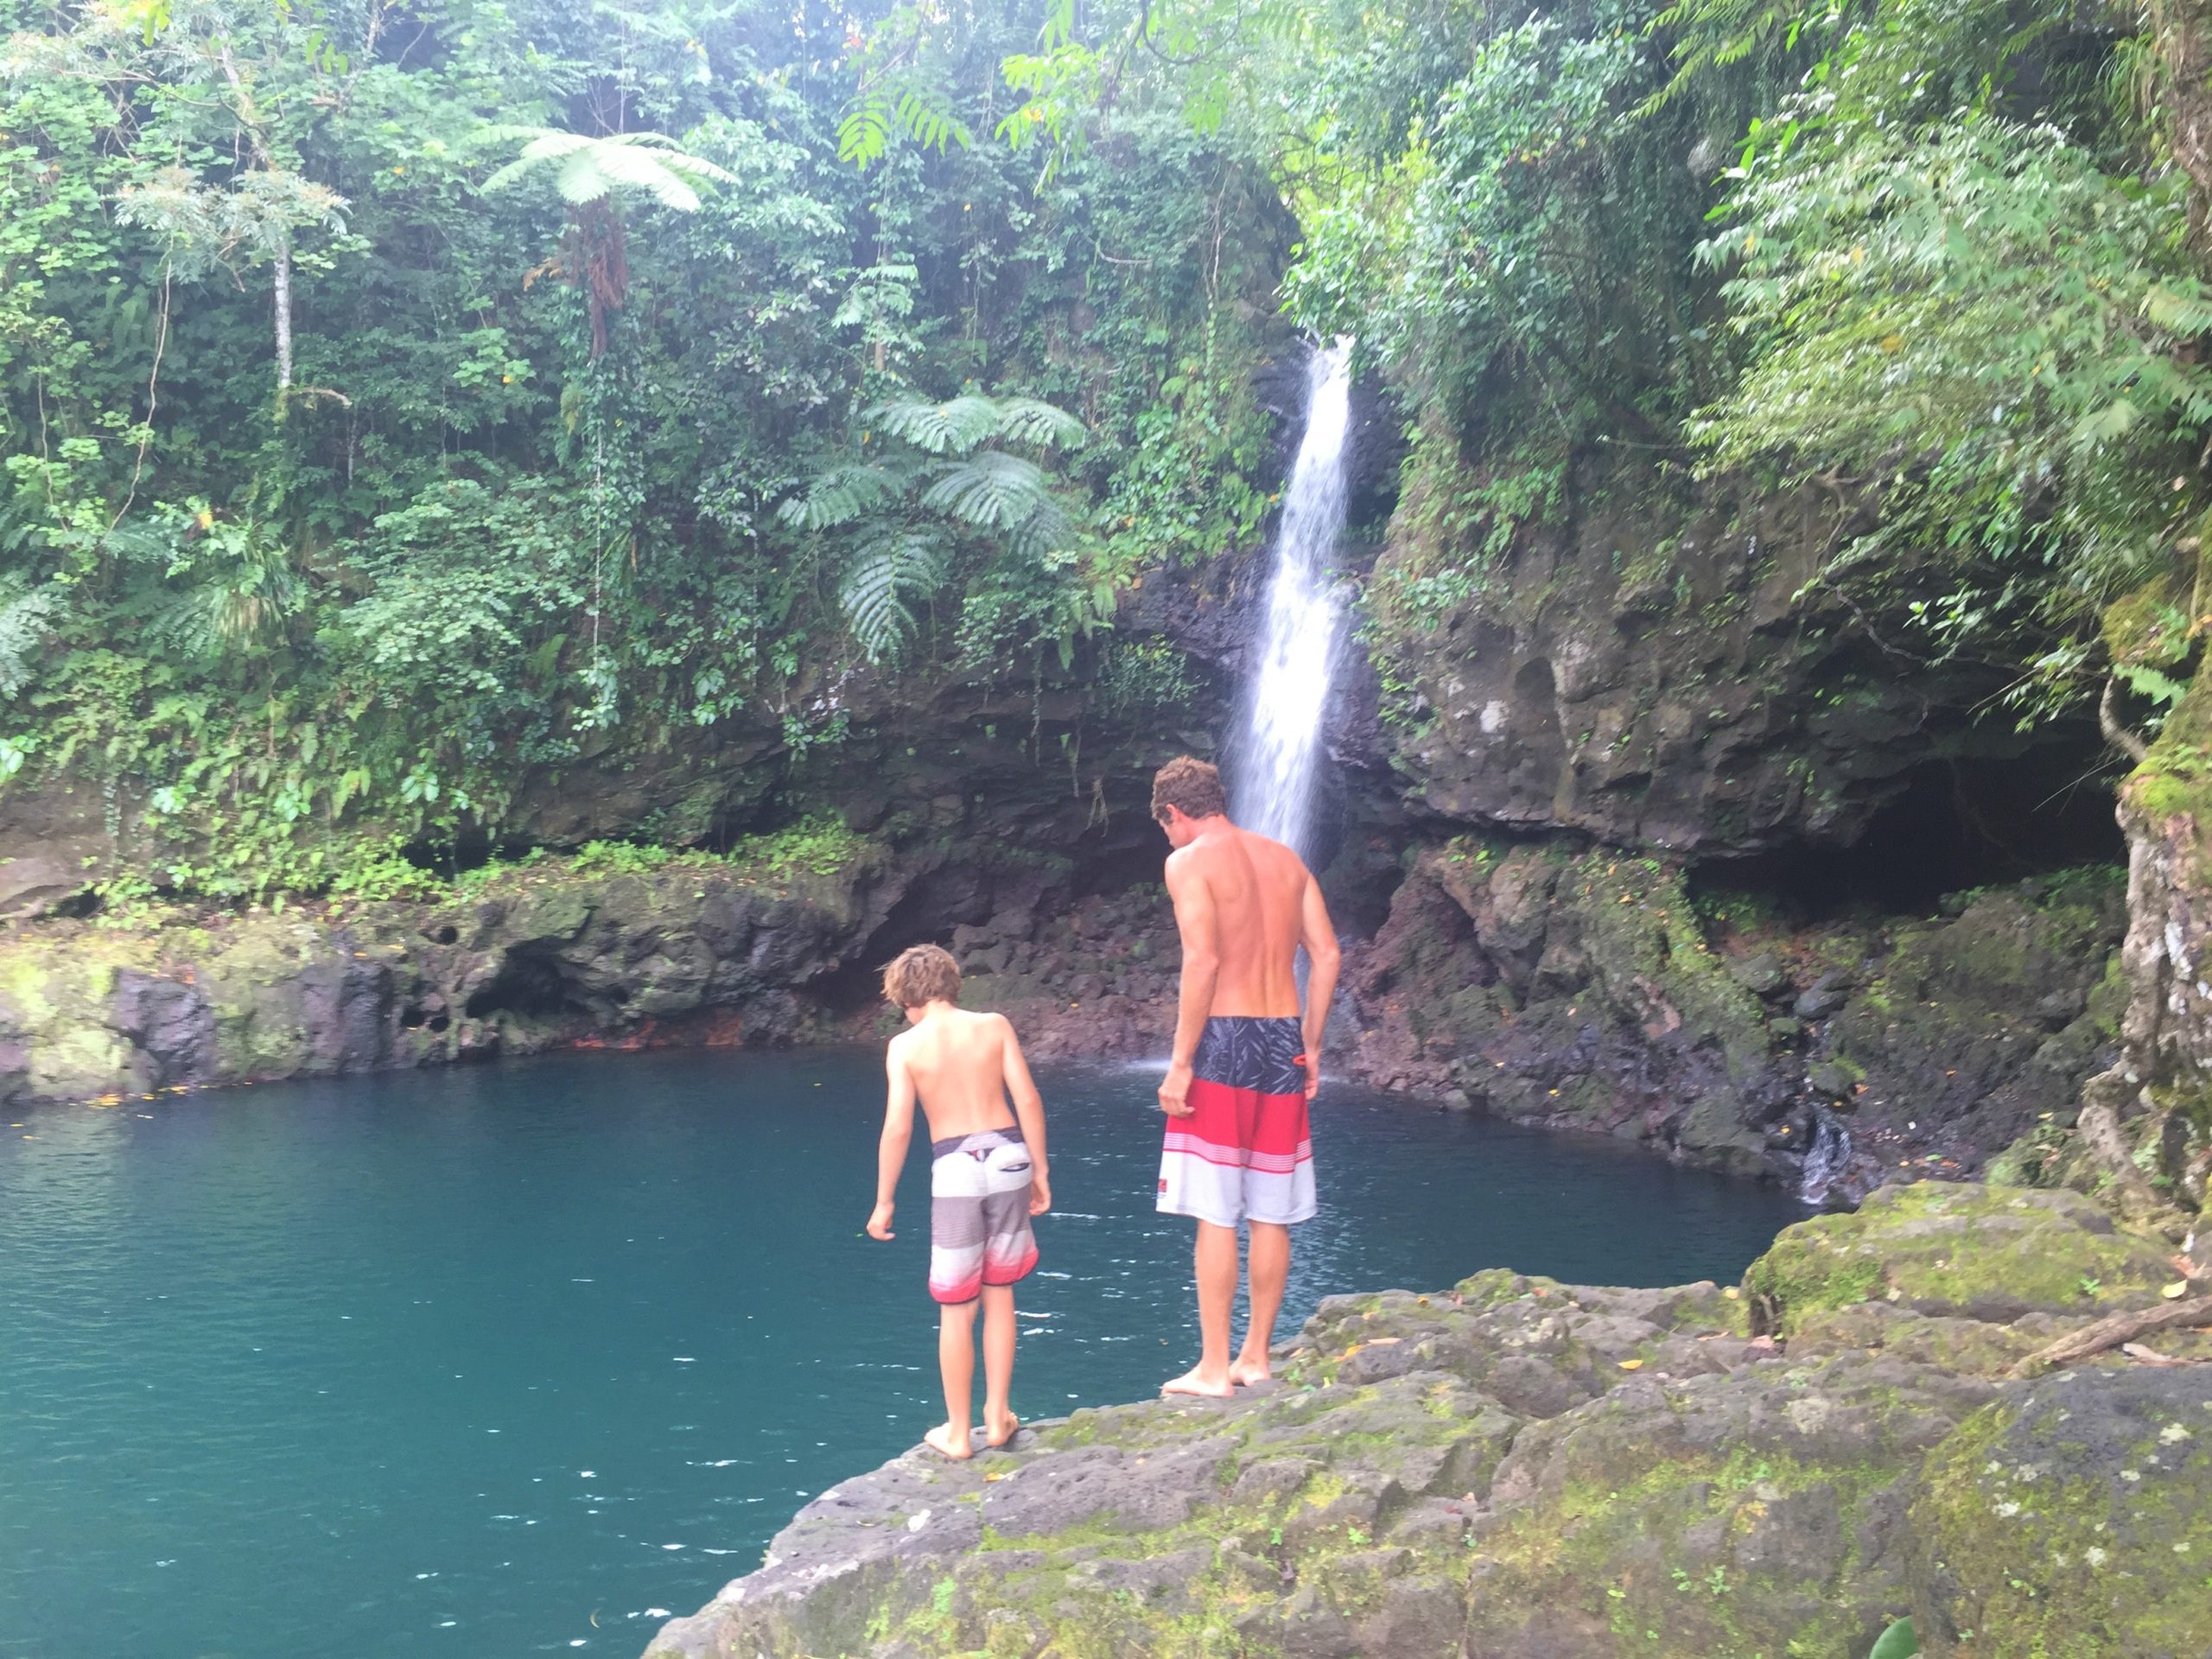 Who's going to jump first? Epic swimming hole on Upolu